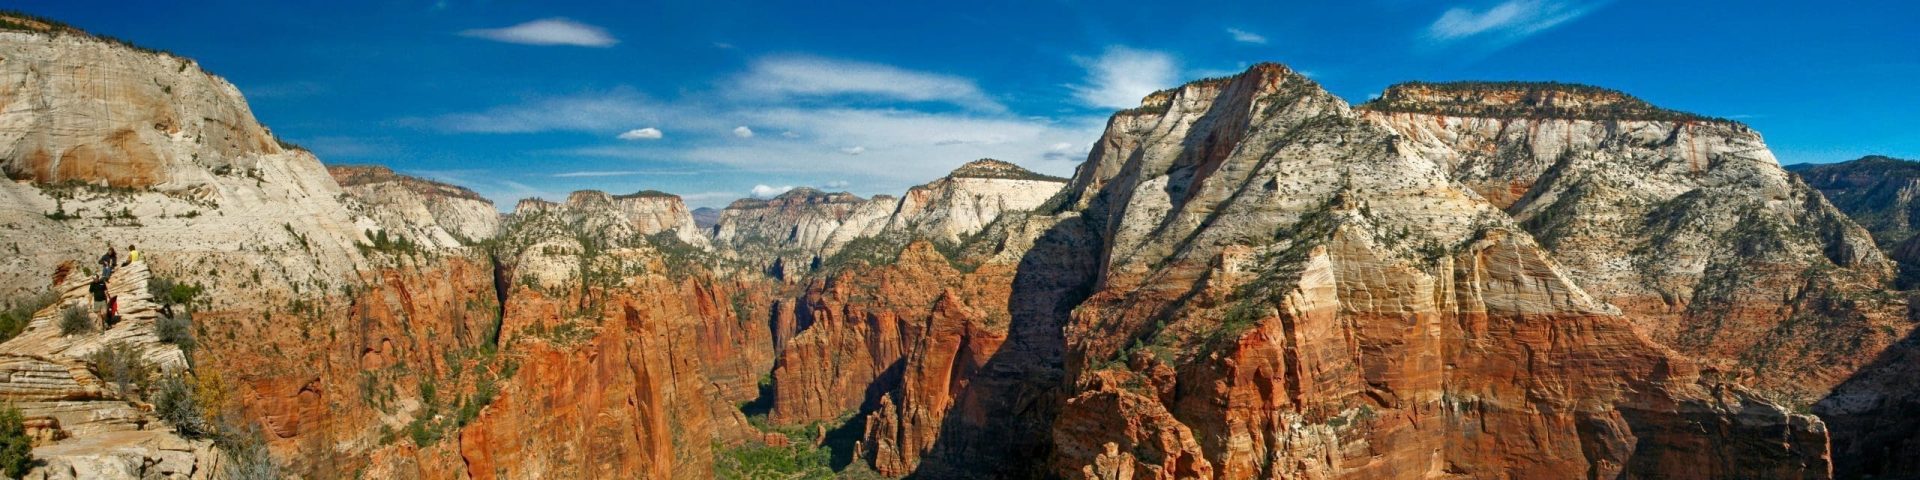 20+ National Parks Self-Guided Driving Tours Bundle